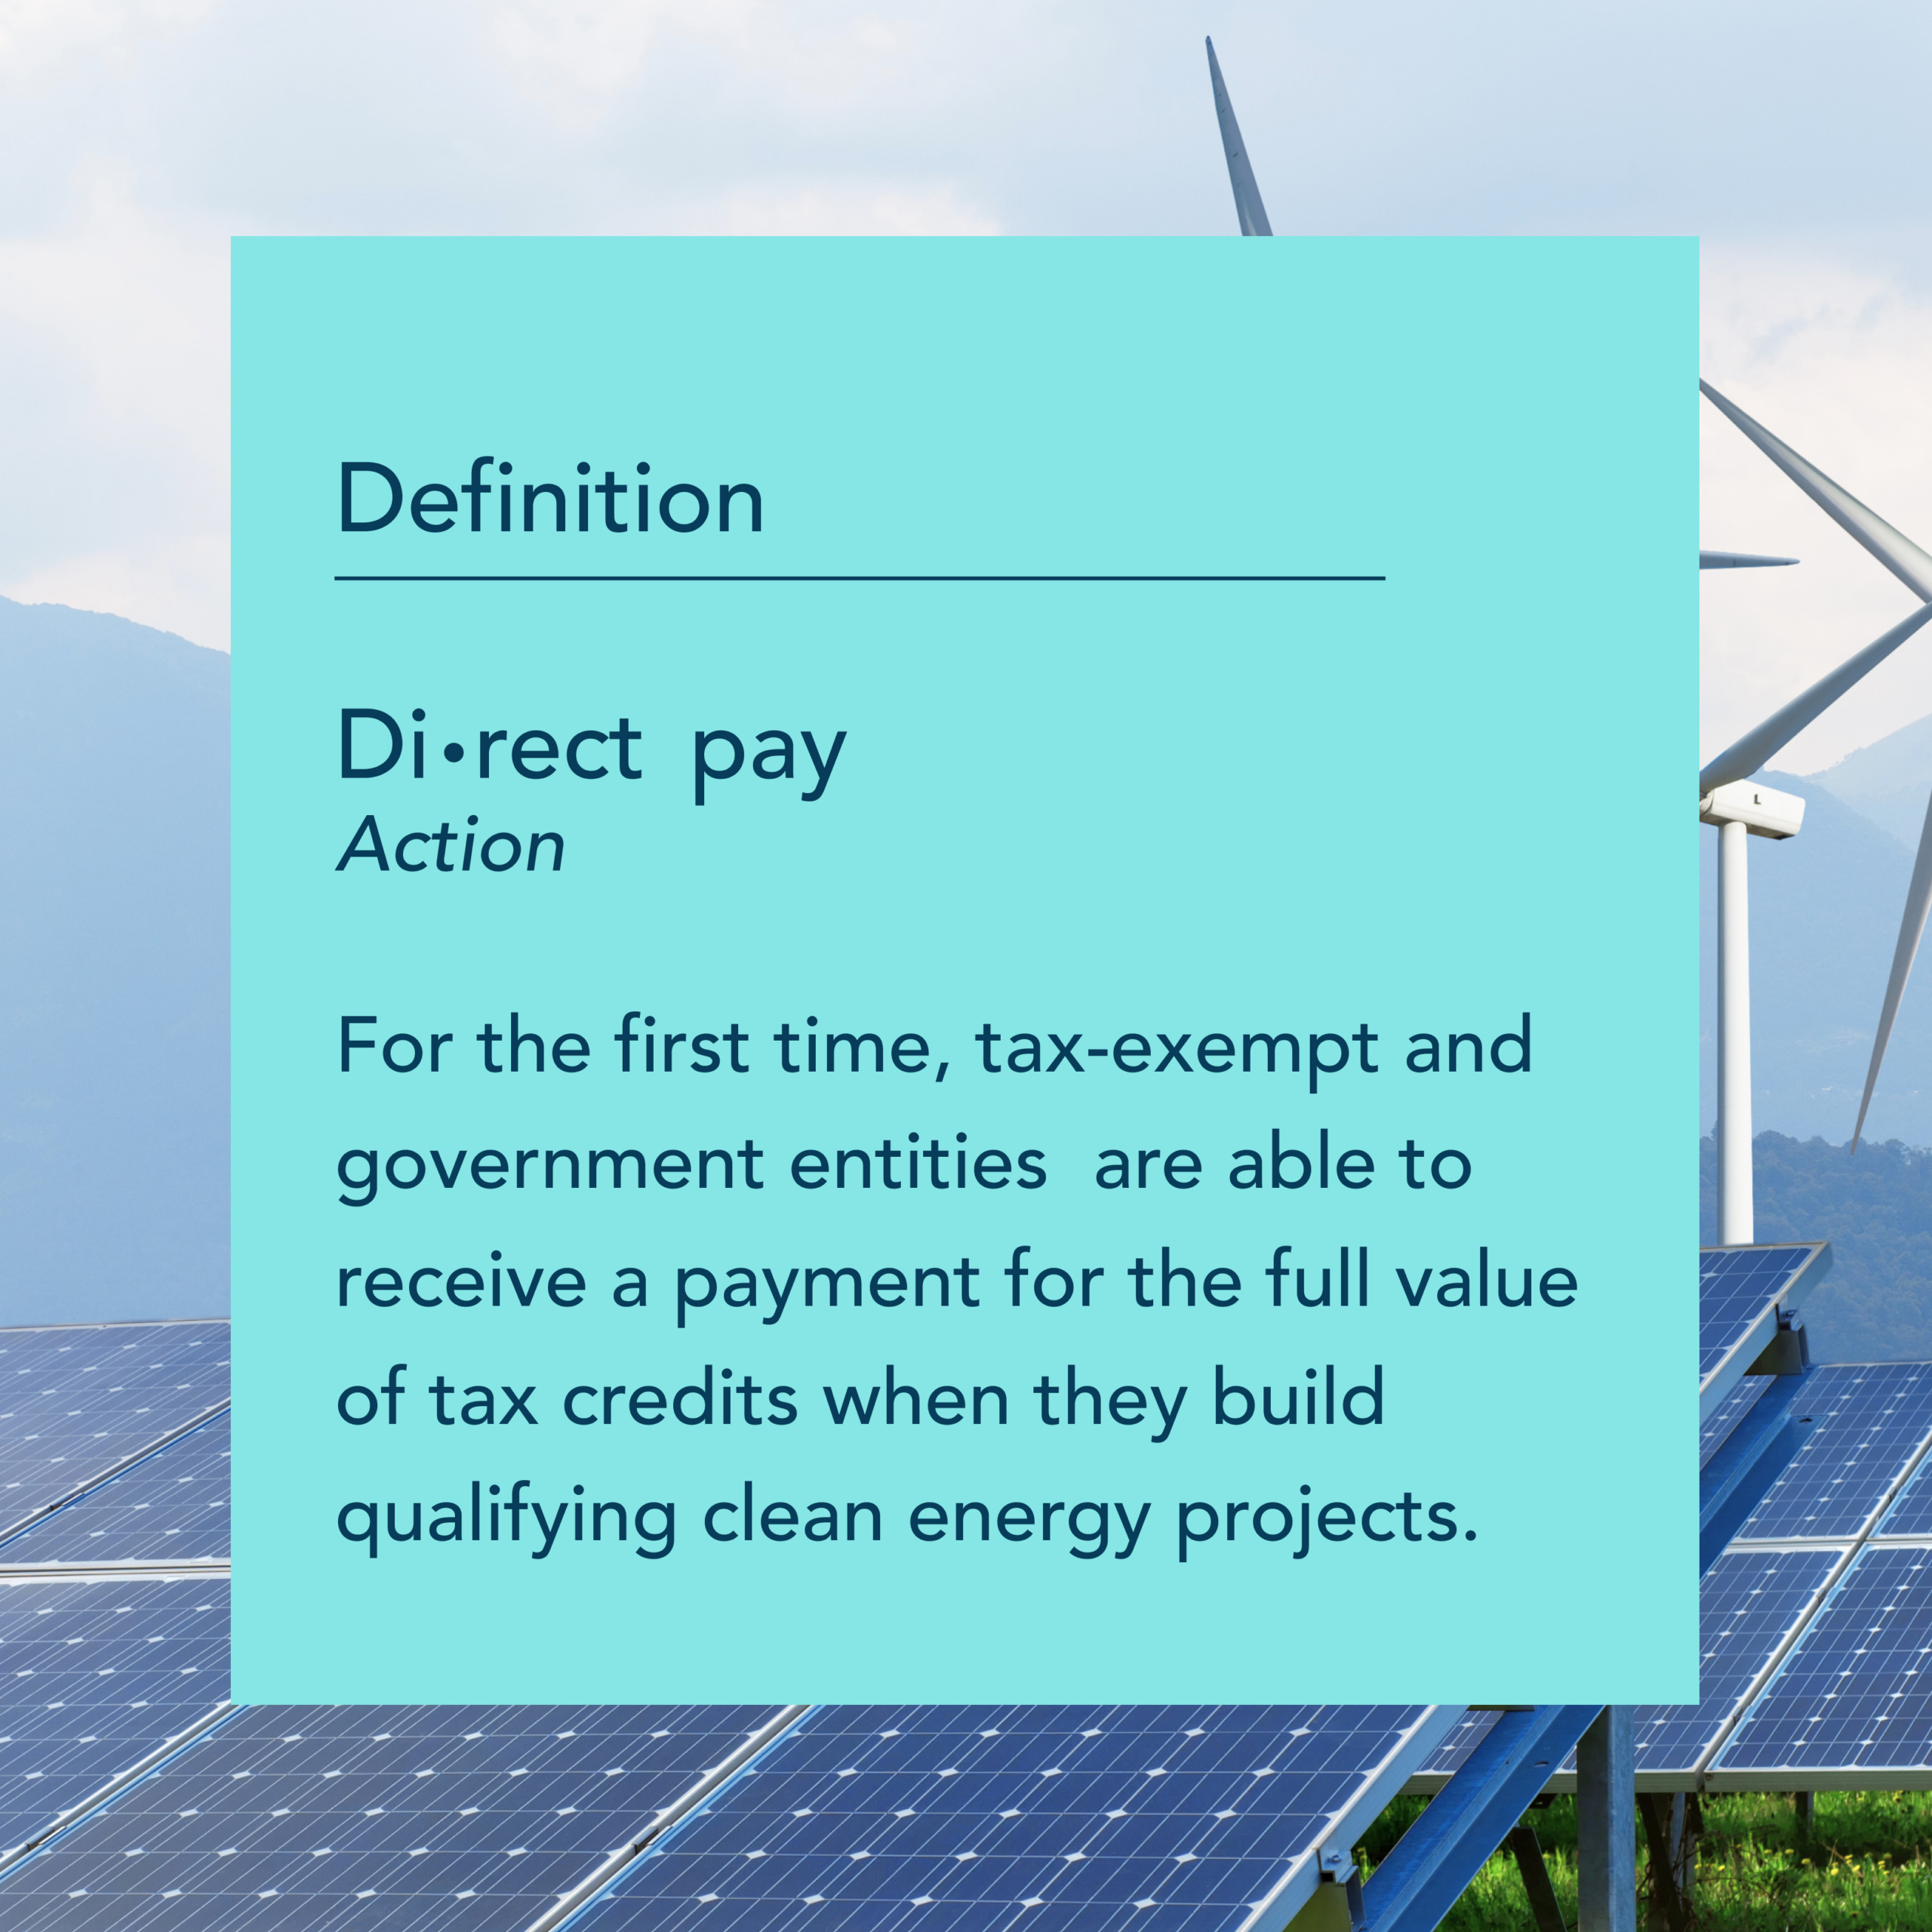 A blue graphic. In the background are solar panels and wind turbines. In the foreground is text that reads Definition: Direct pay. Action. For the first time, tax-exempt and government entities are able to receive a payment for the full value of tax credits when they build qualifying clean energy projects.